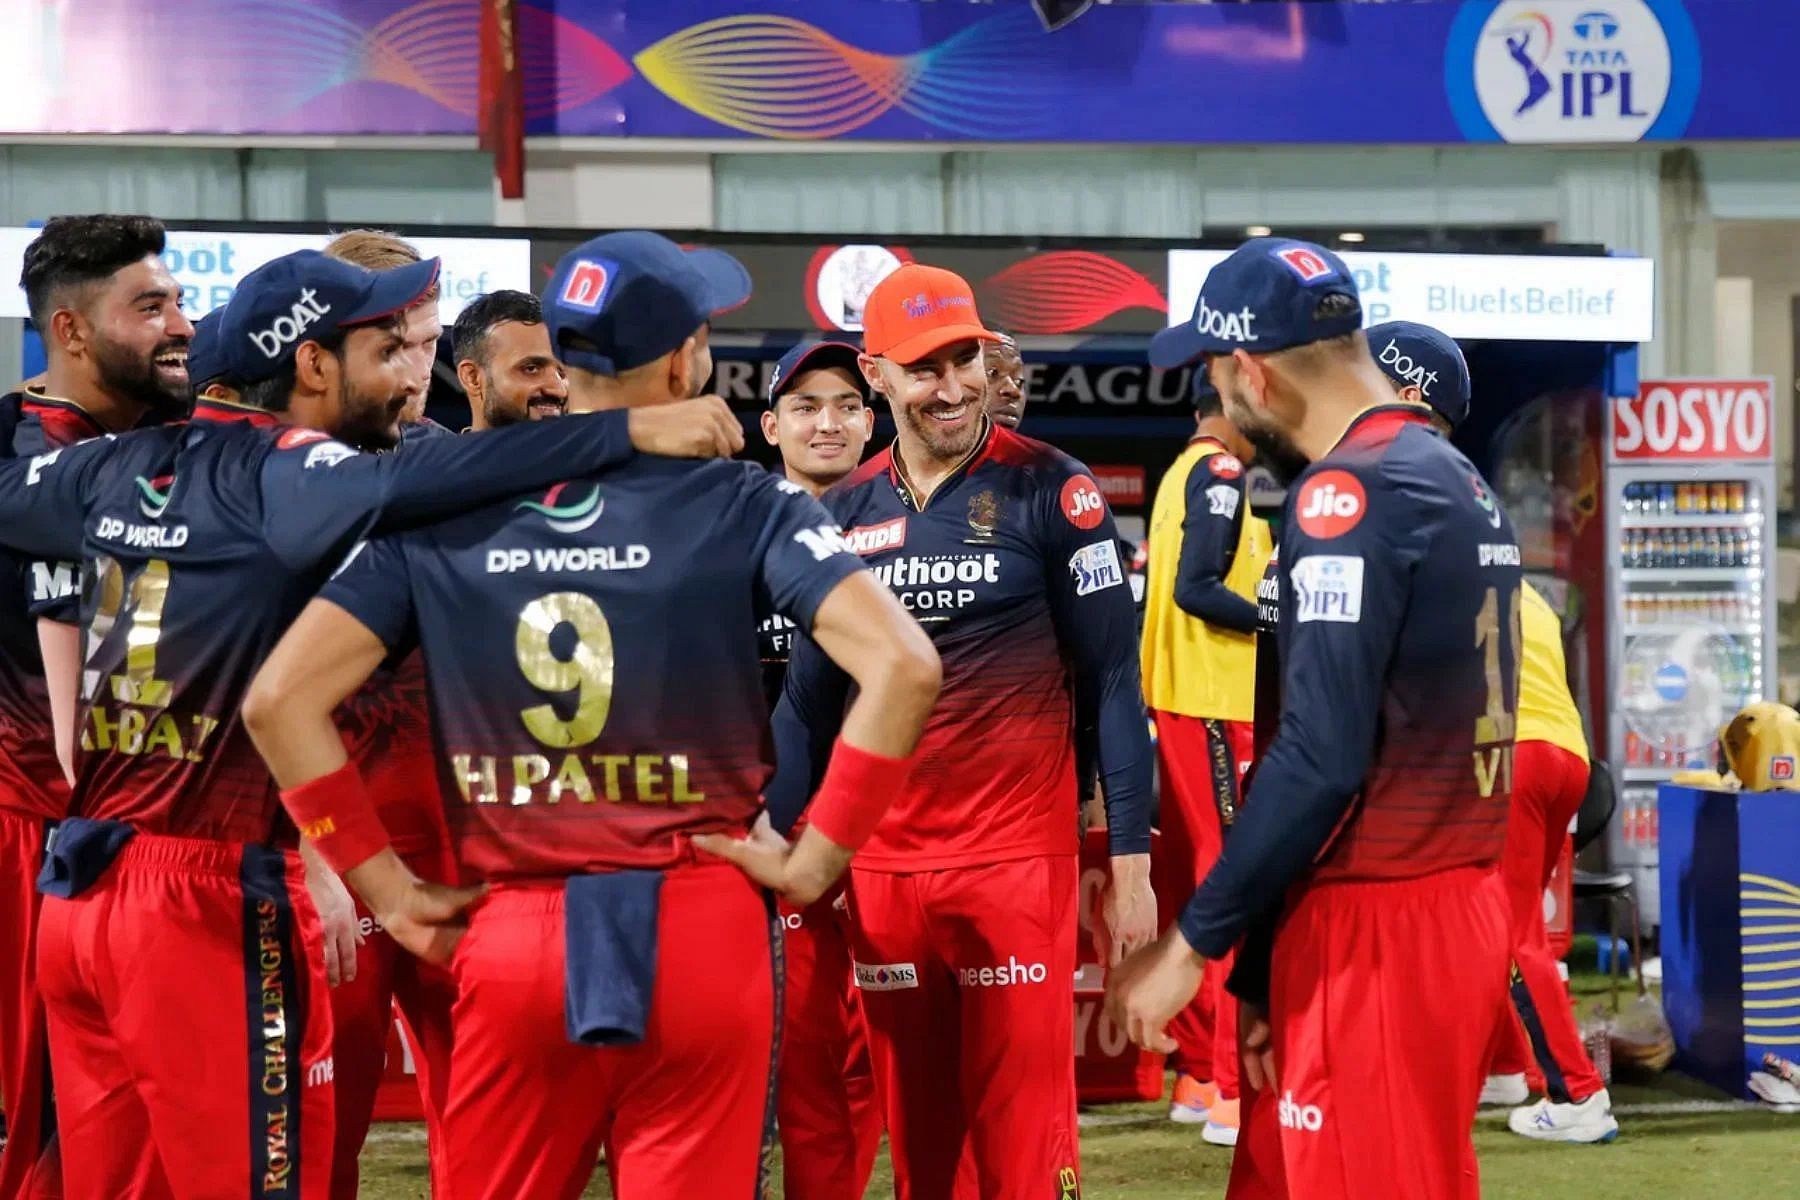 The Royal Challengers Bangalore finished third in IPL 2022. [P/C: iplt20.com]